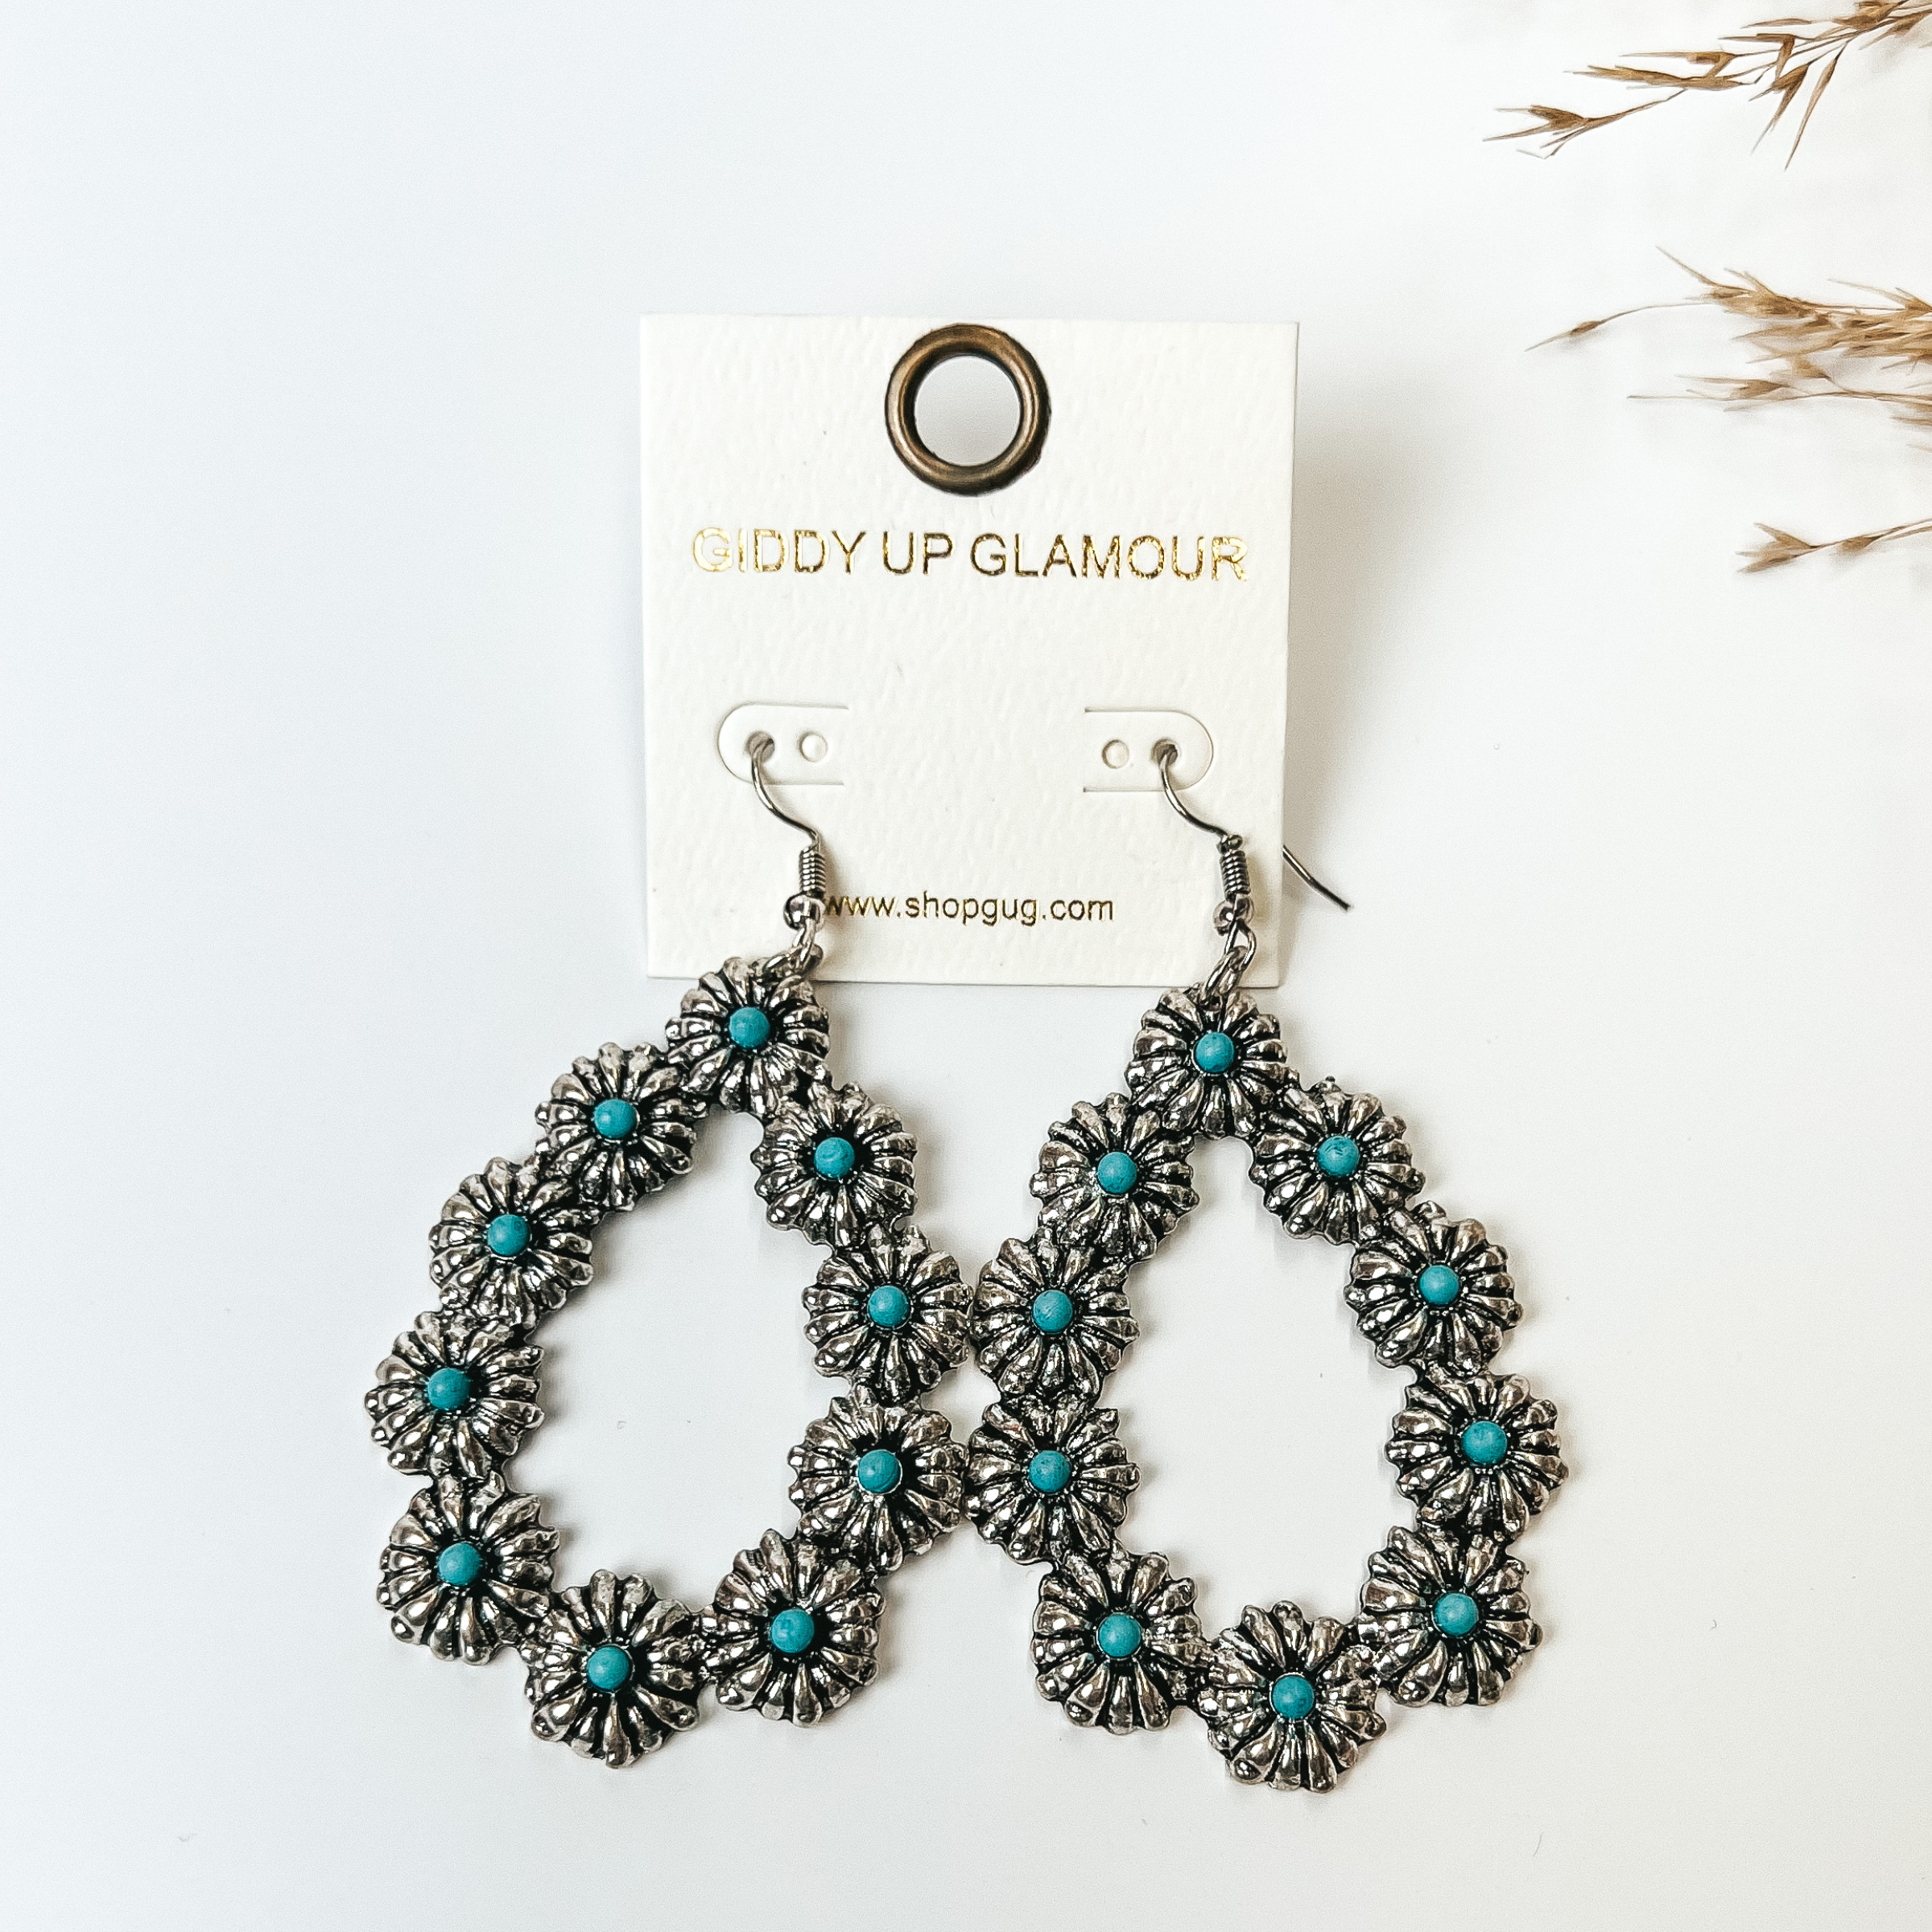 Silver flower concho outline teardrop earrings with center turquoises stones in each concho. These earrings are pictured on a white background. 